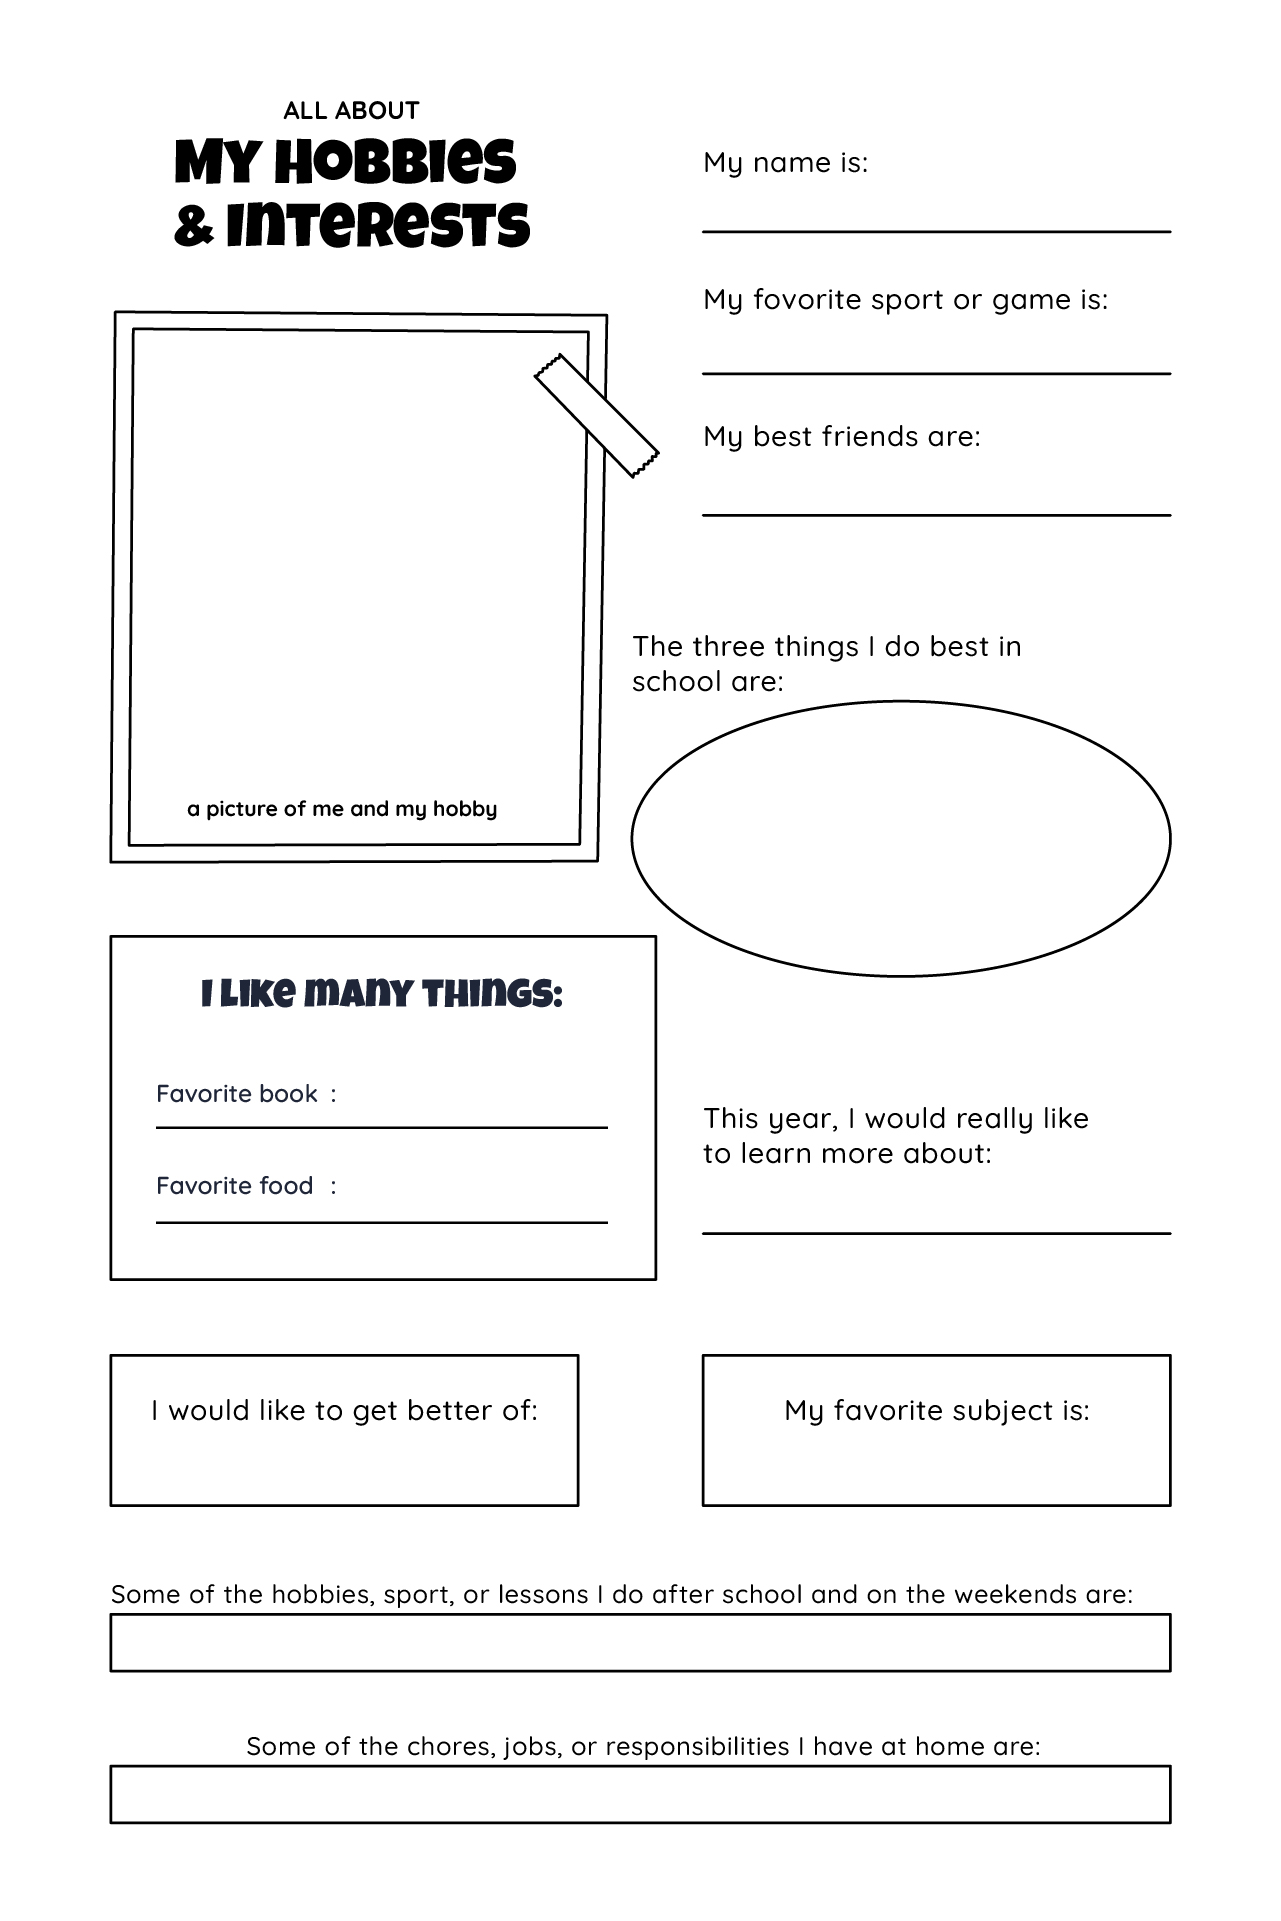 All About My Hobbies And Interests Printable Survey